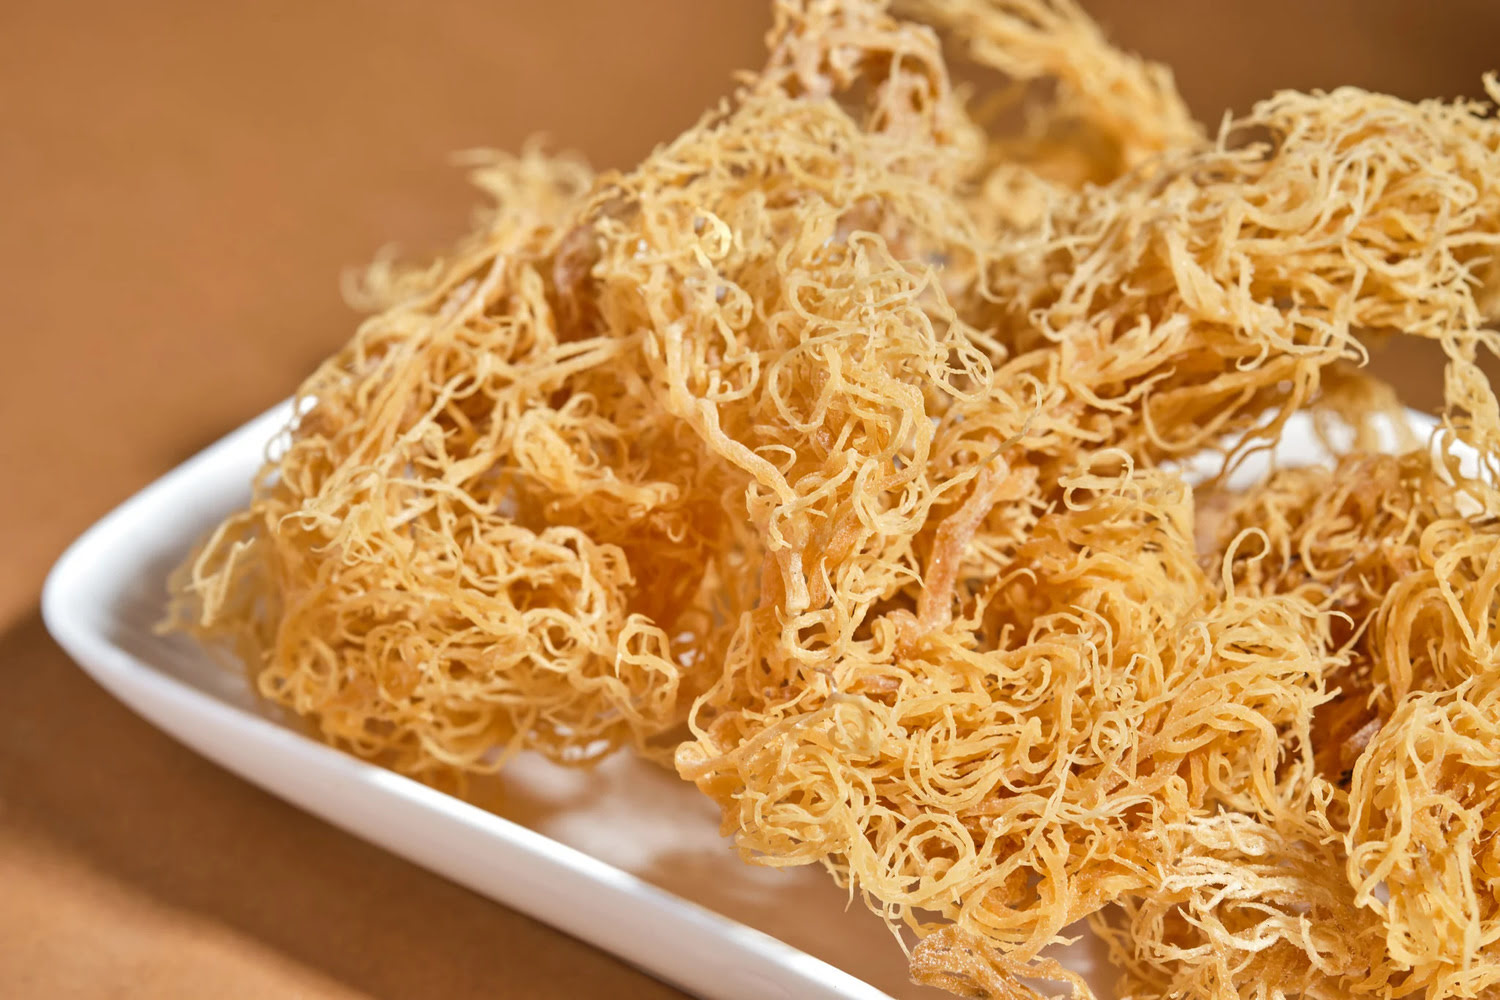 How To Store Dry Sea Moss